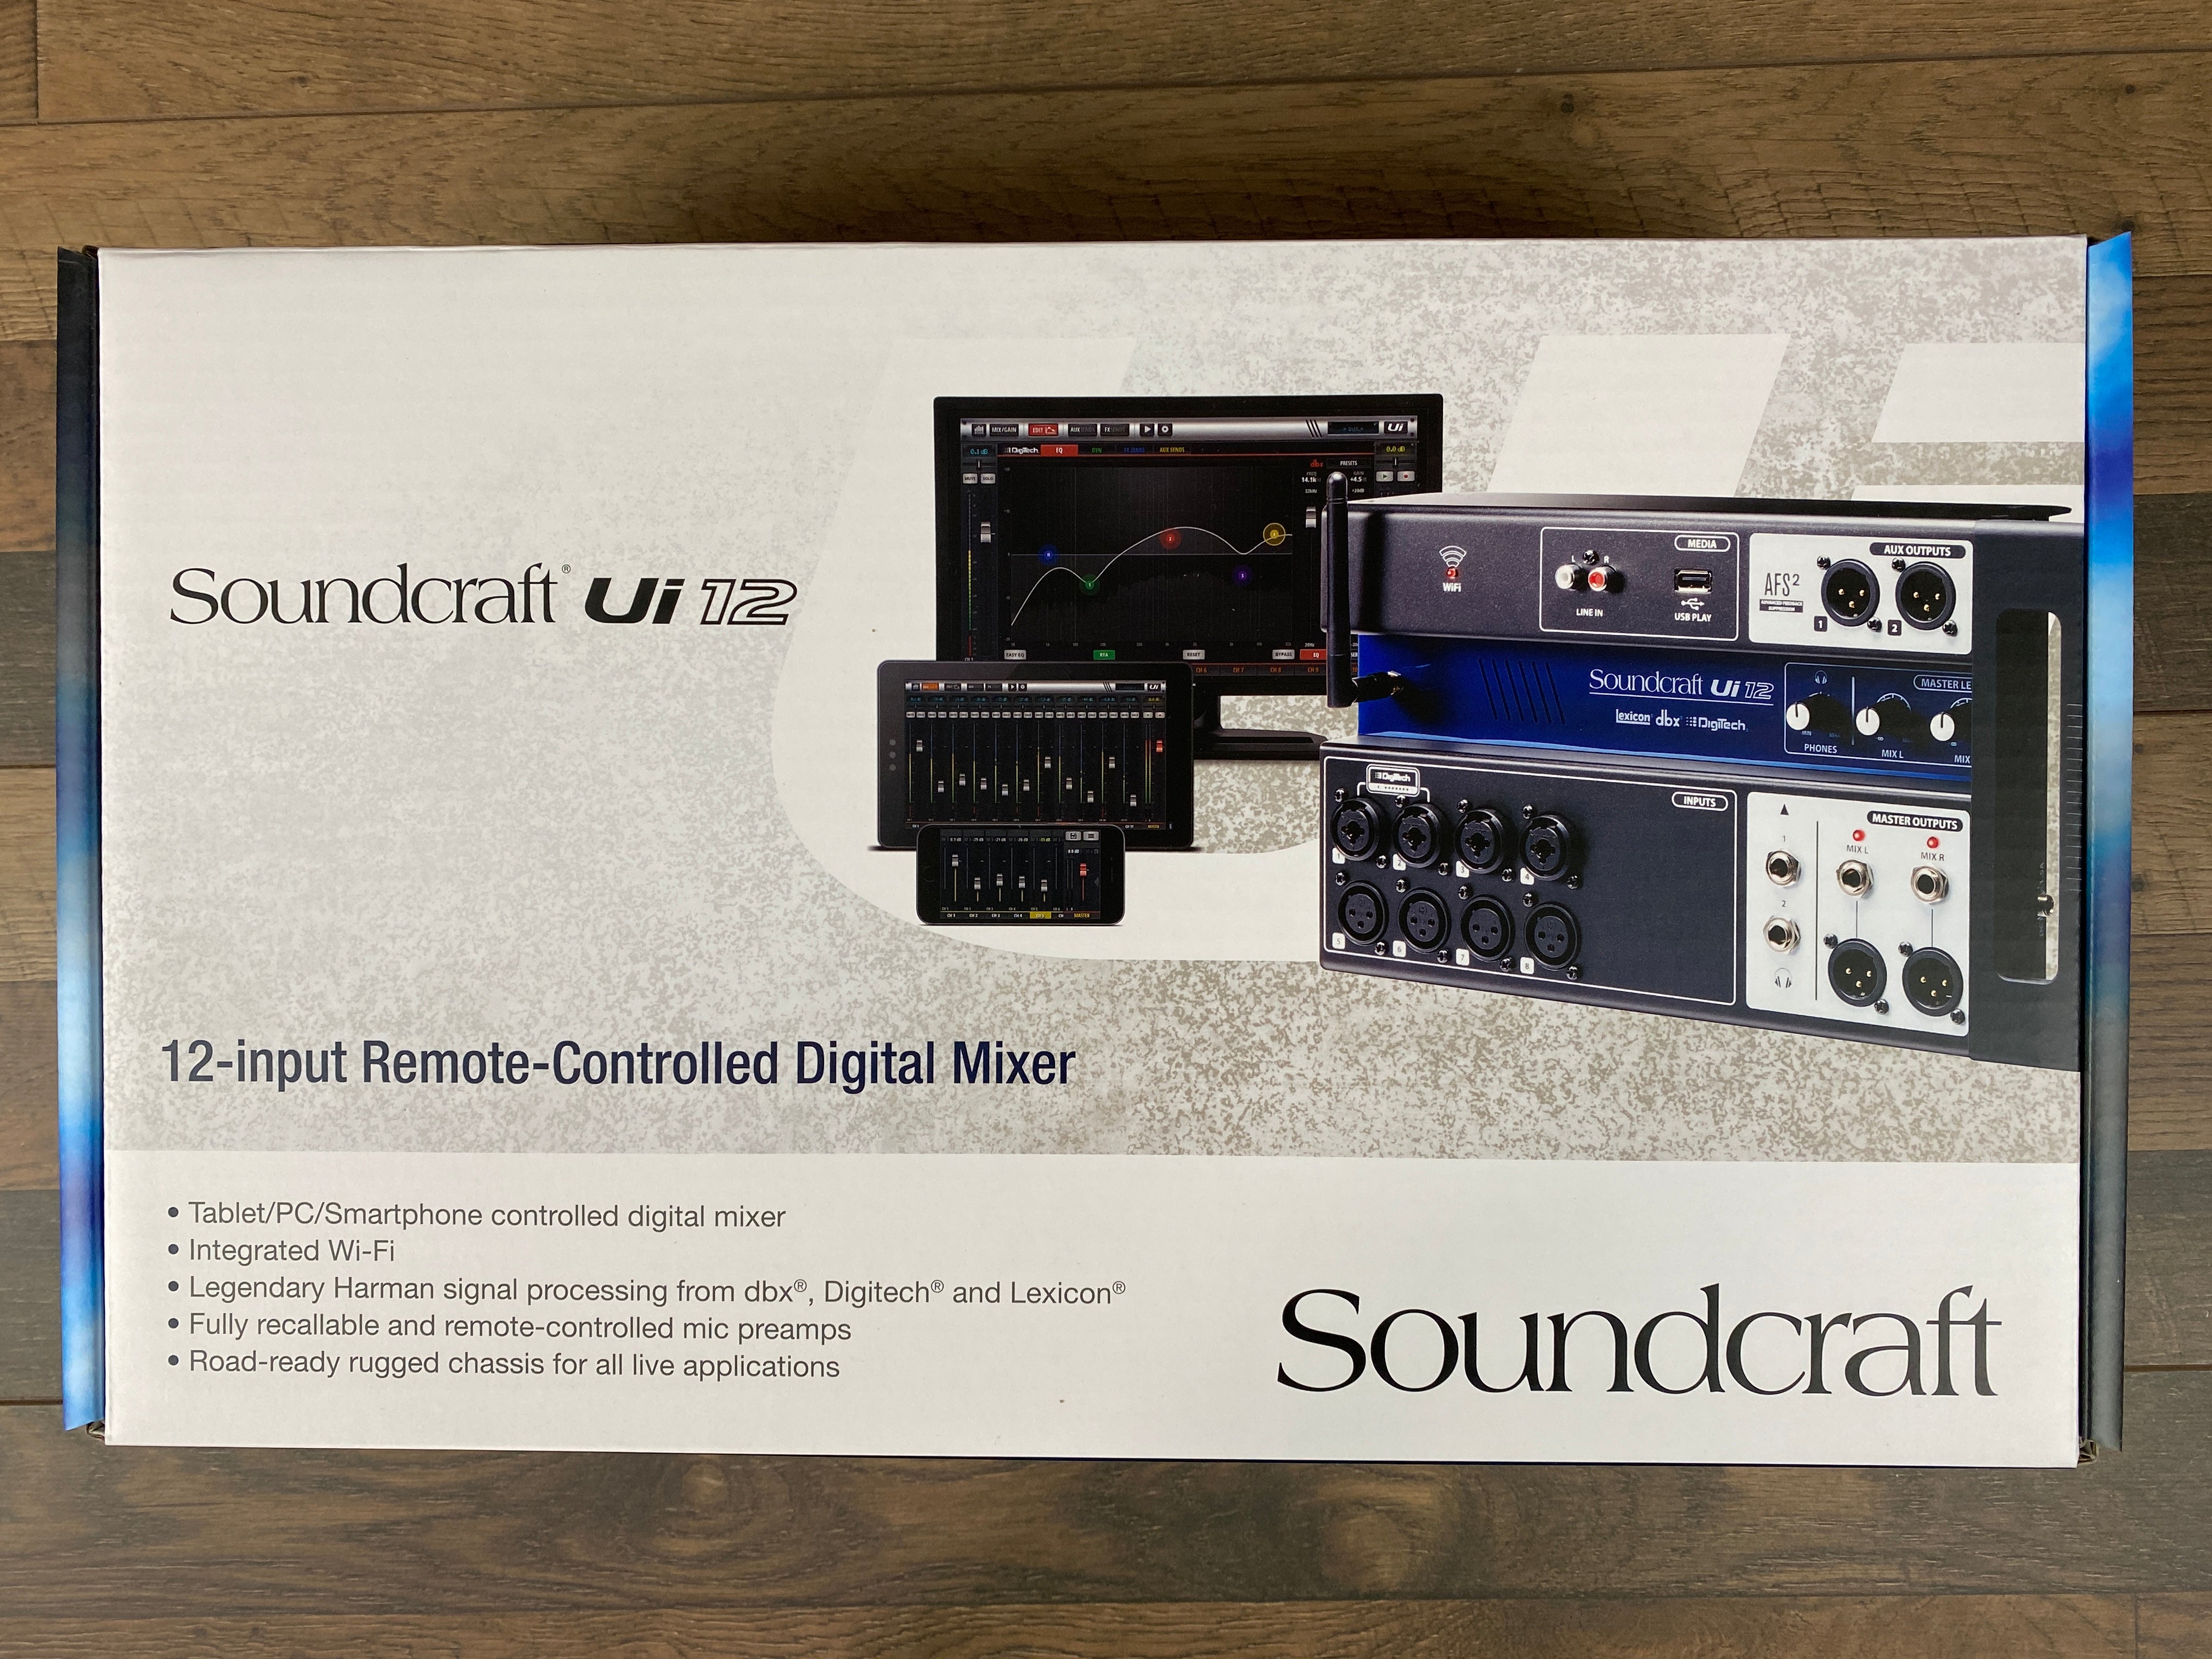 Soundcraft Ui12 12-channel Digital Mixer With WIFI for Wireless Control